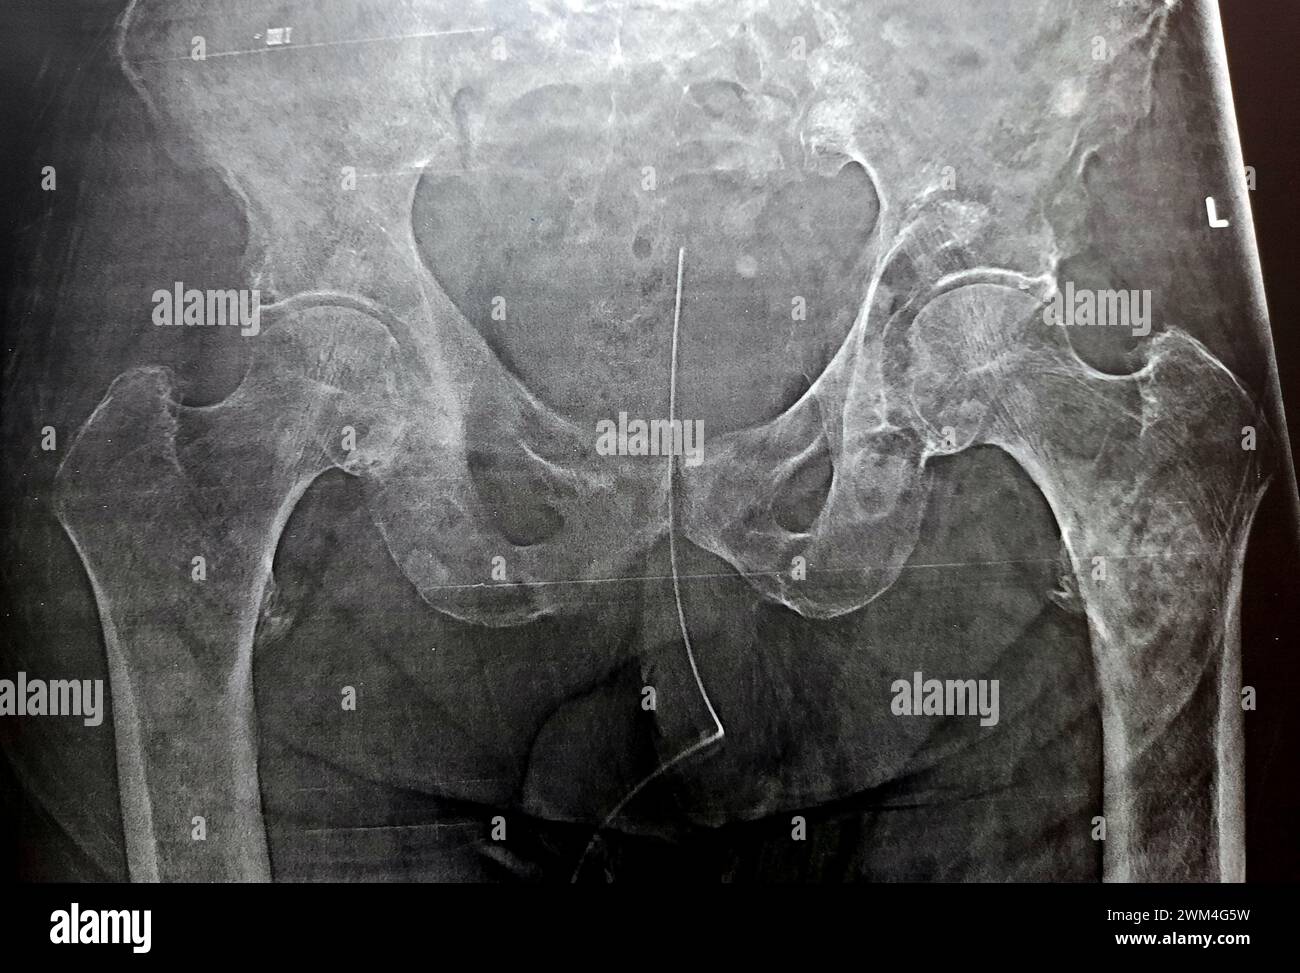 High probability of subtrochanteric, trochanteric fissure fracture, and malignancy metastasis in medial side of the upper femur shaft, of an old patie Stock Photo